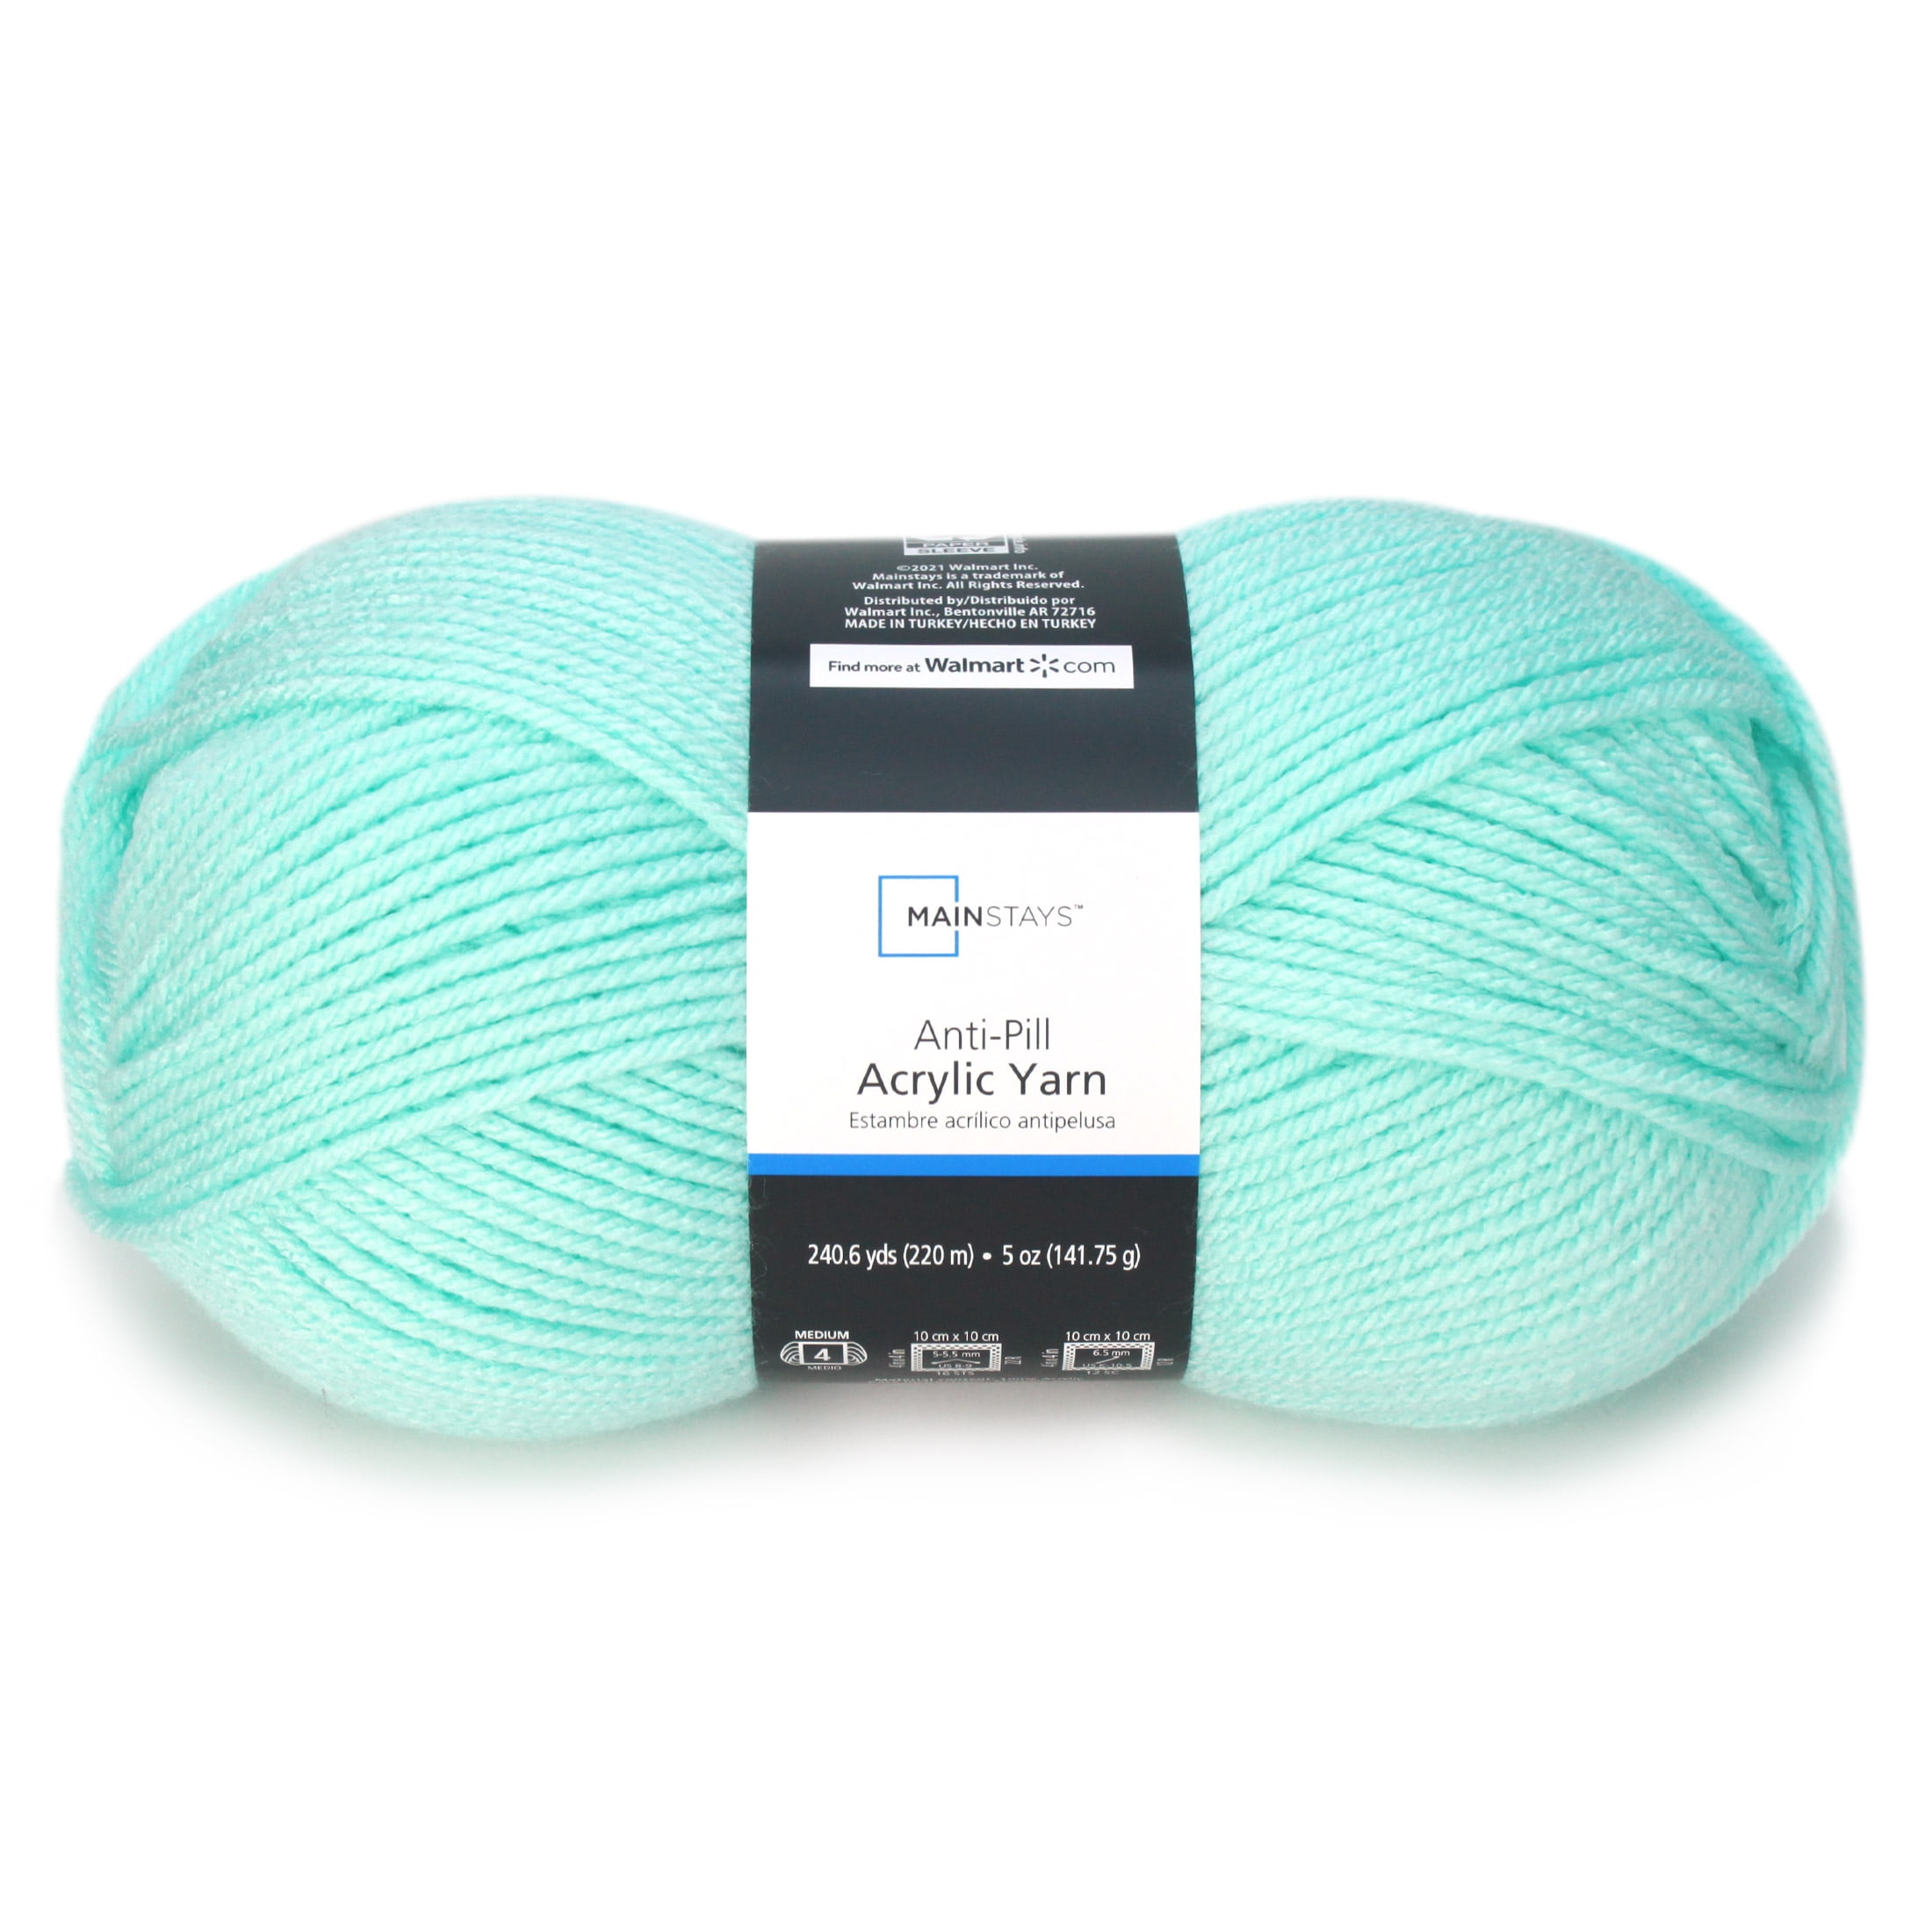 Soft Classic Multi Ombre Yarn by Loops & Threads - Multicolor Yarn for  Knitting, Crochet, Weaving, Arts & Crafts - Orchard Mist, Bulk 12 Pack